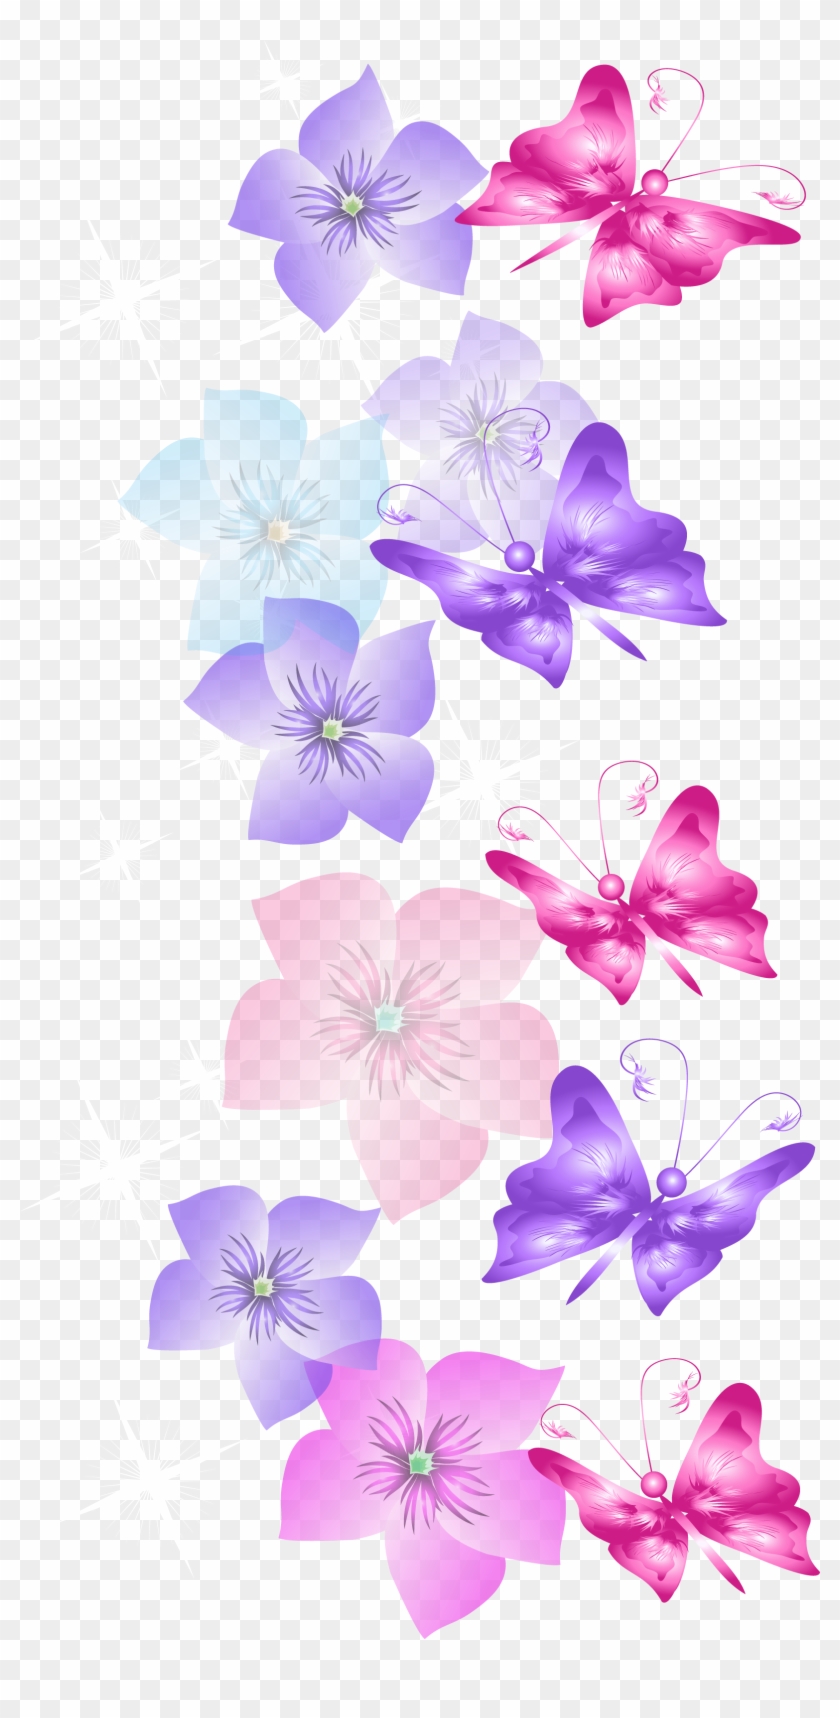 Butterflies And Flowers Decoration Png Clipart - Butterfly Decoration Png #349947